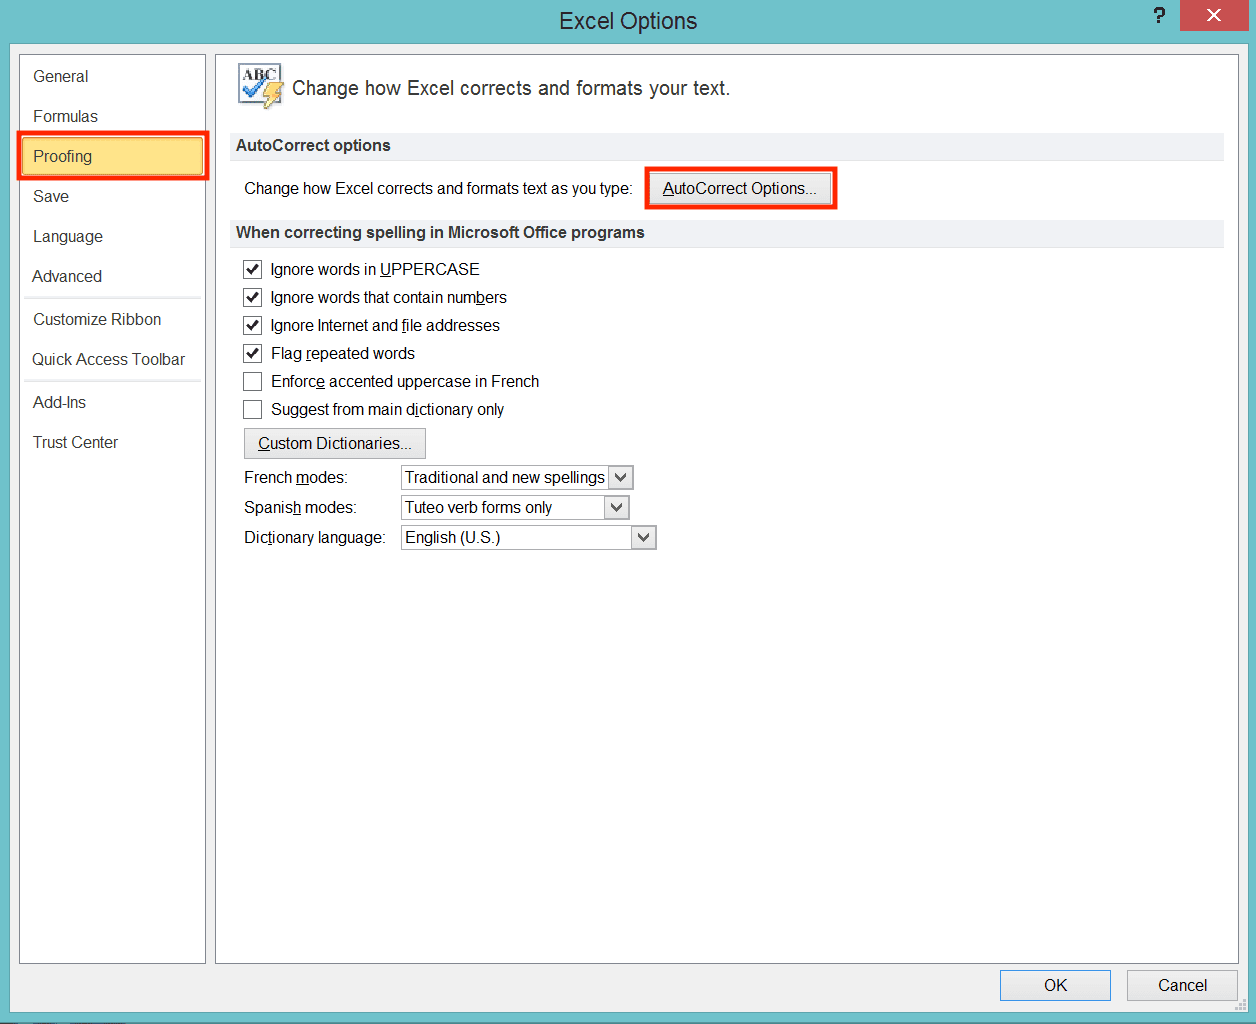 How to Insert a Tick Symbol/Checkmark in Excel - Screenshot of the Proofing and AutoCorrect Options Buttons Locations in Excel